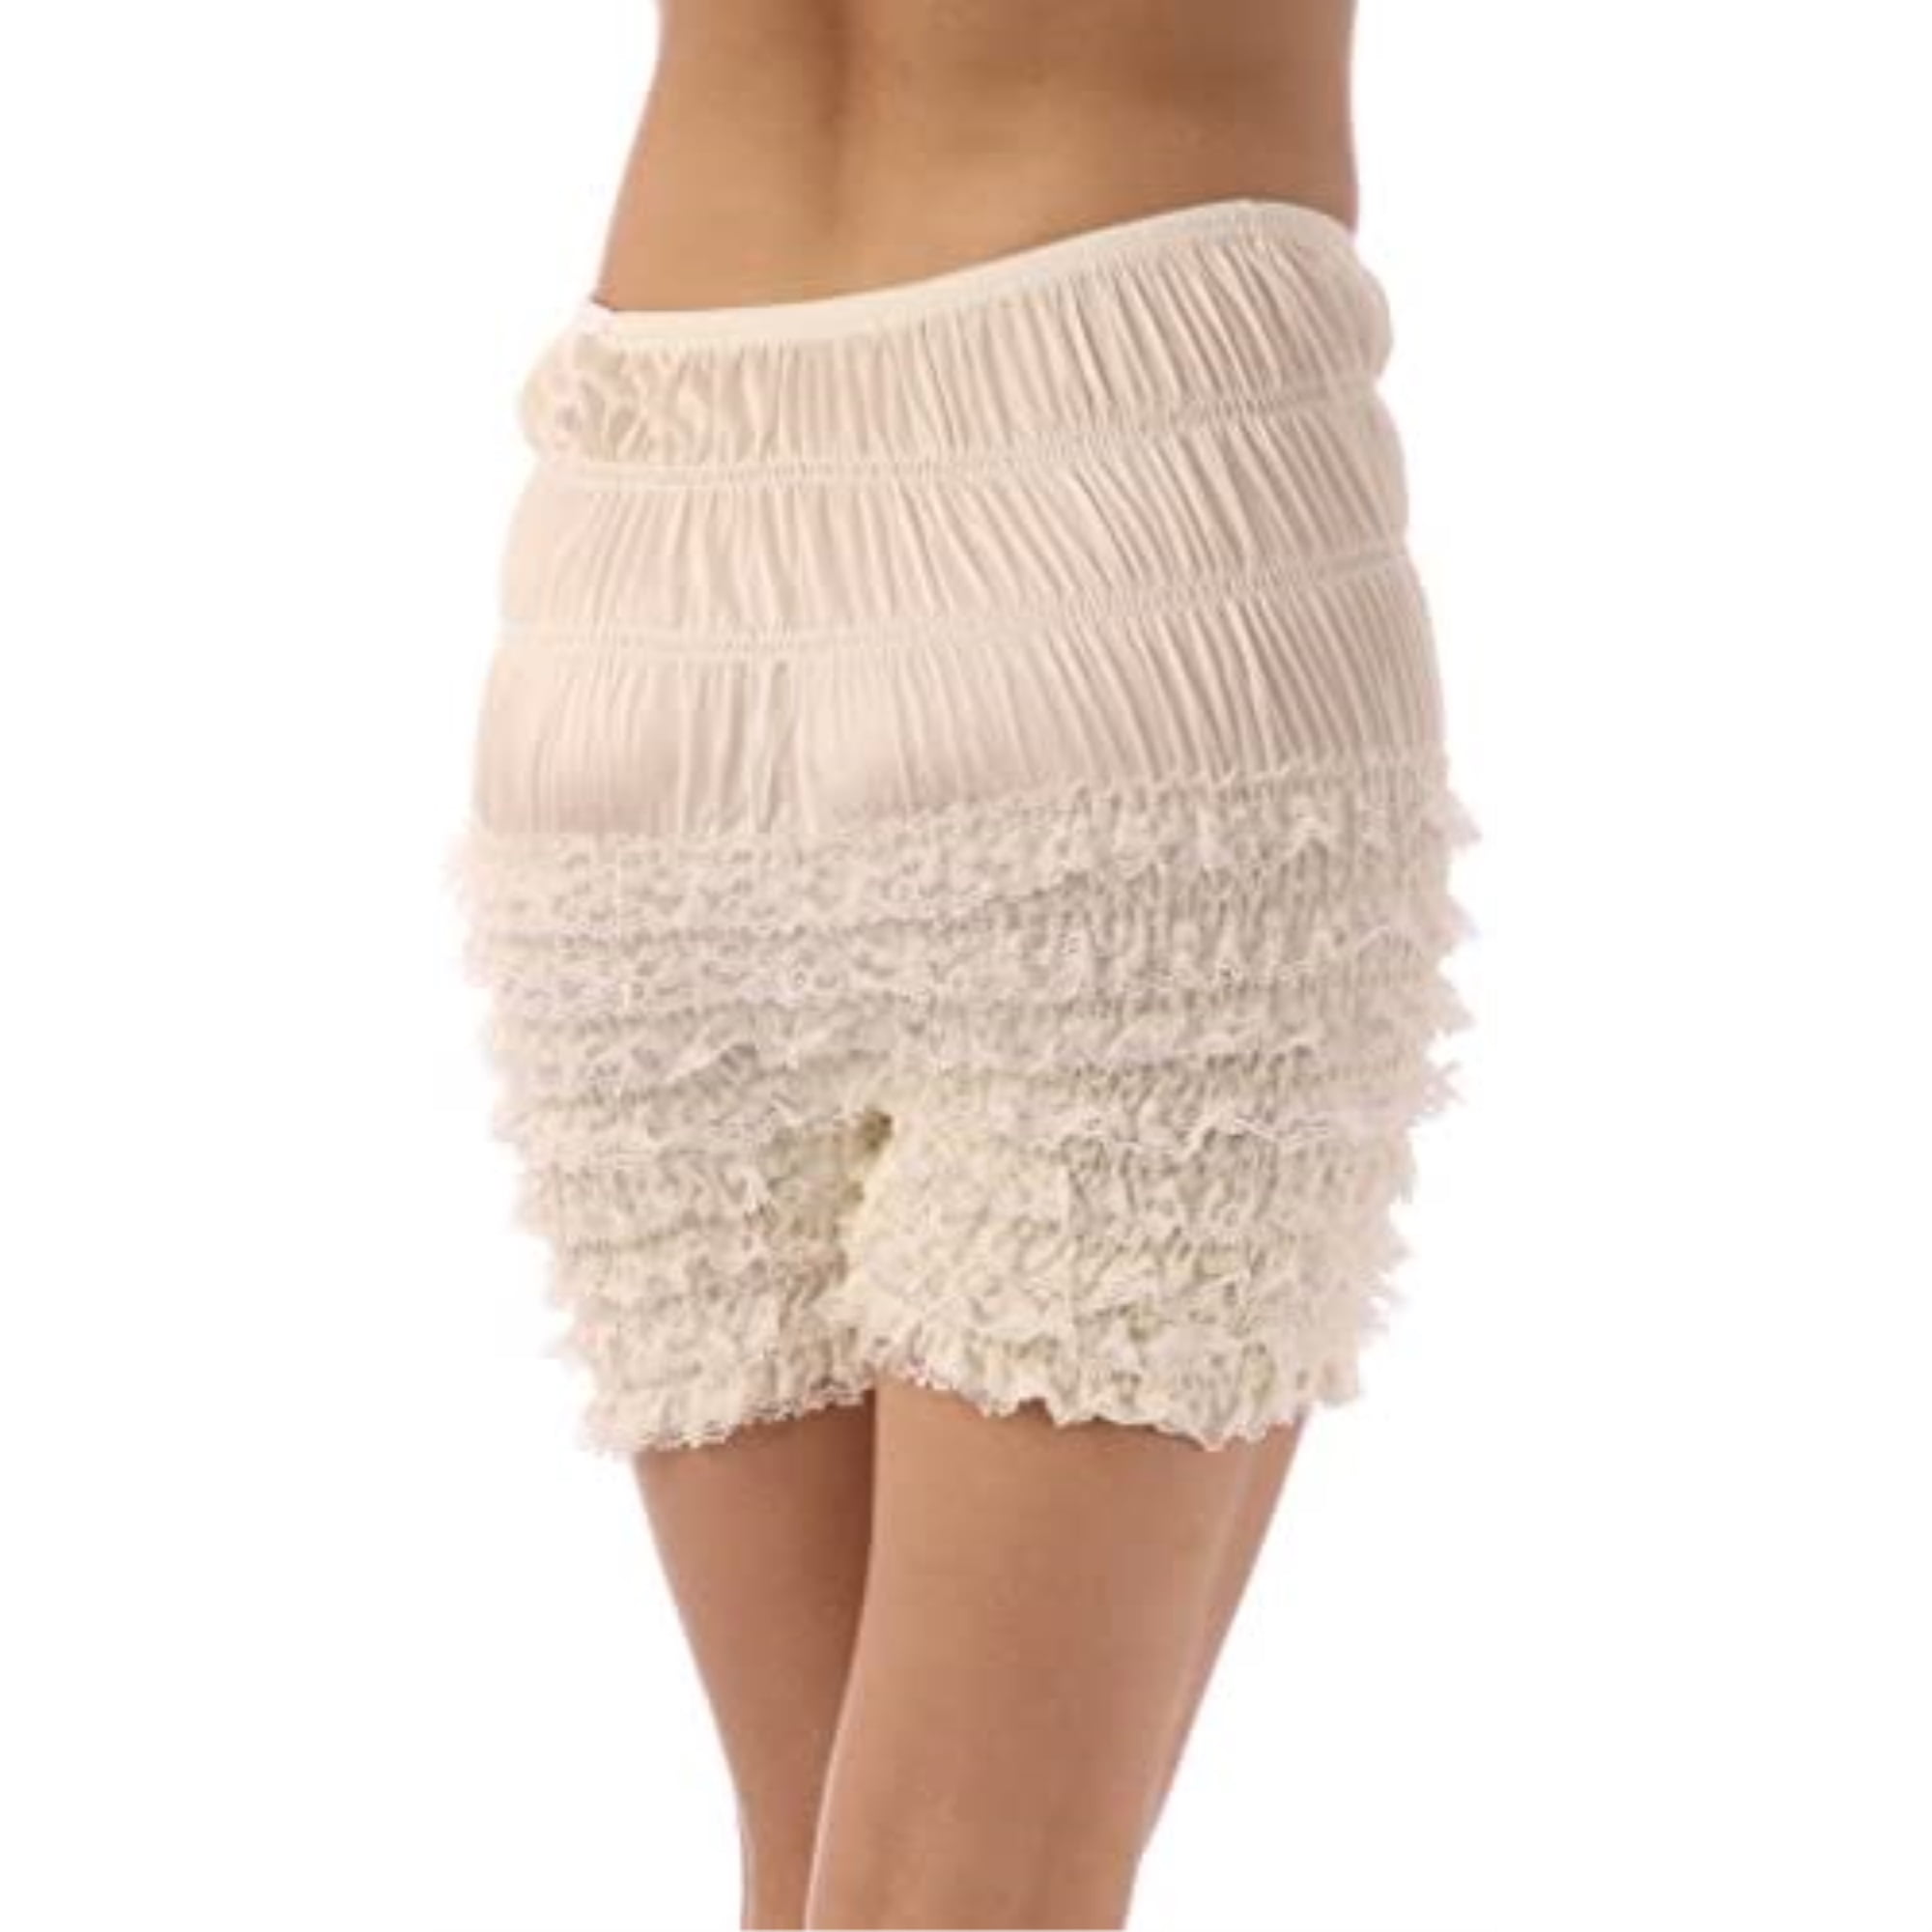 Malco Modes - Malco Modes Adult Pettipants, Style N24, Sexy Ruffled ...